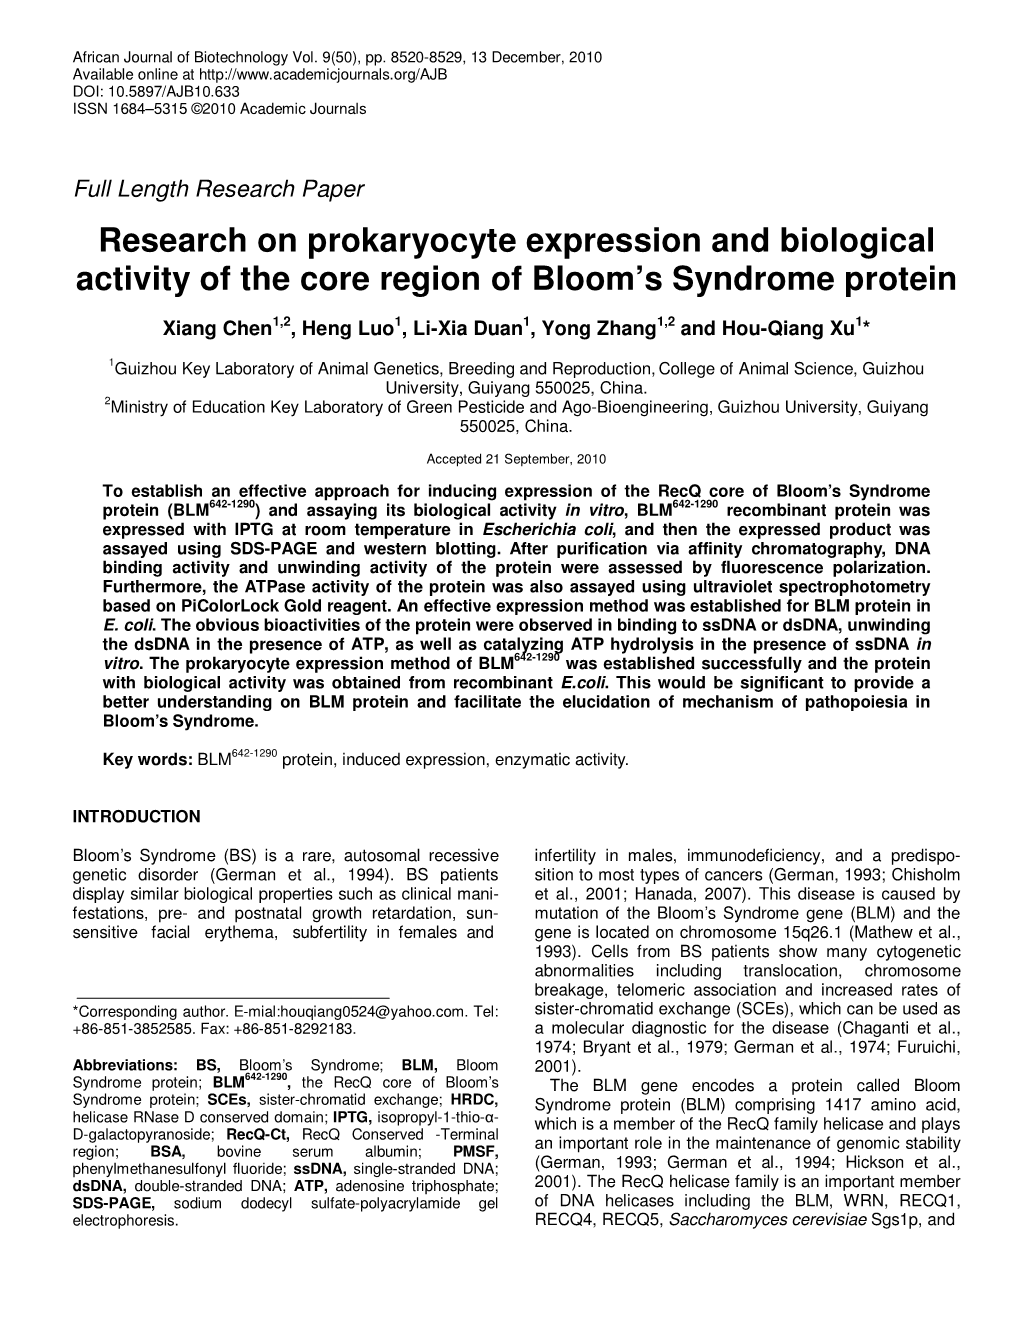 Research on Prokaryocyte Expression and Biological Activity of the Core Region of Bloom’S Syndrome Protein